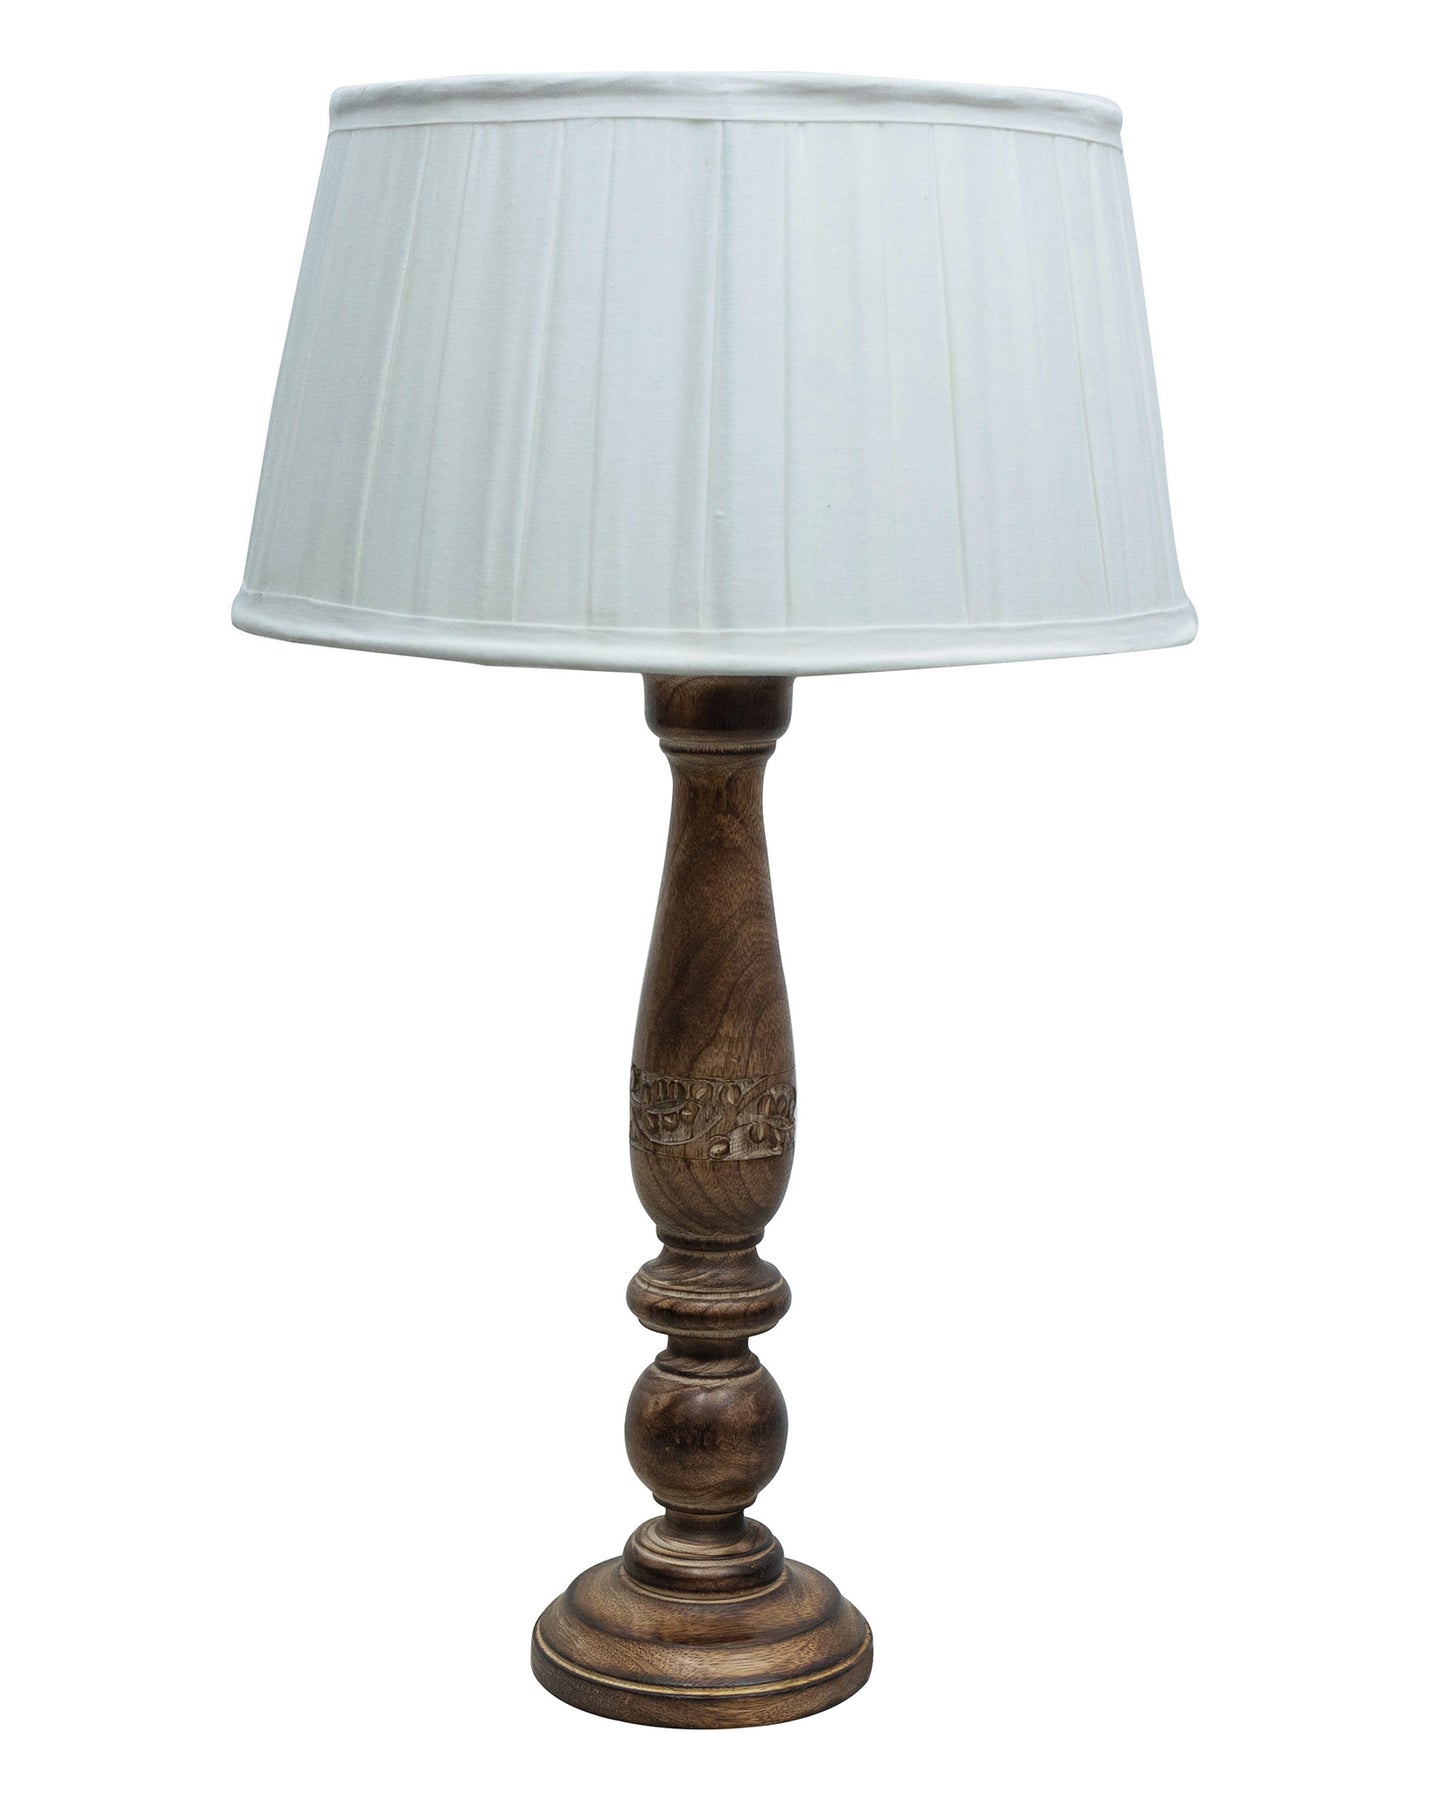 Mable Antique Wooden Table Lamp with Empire Pleated Shade